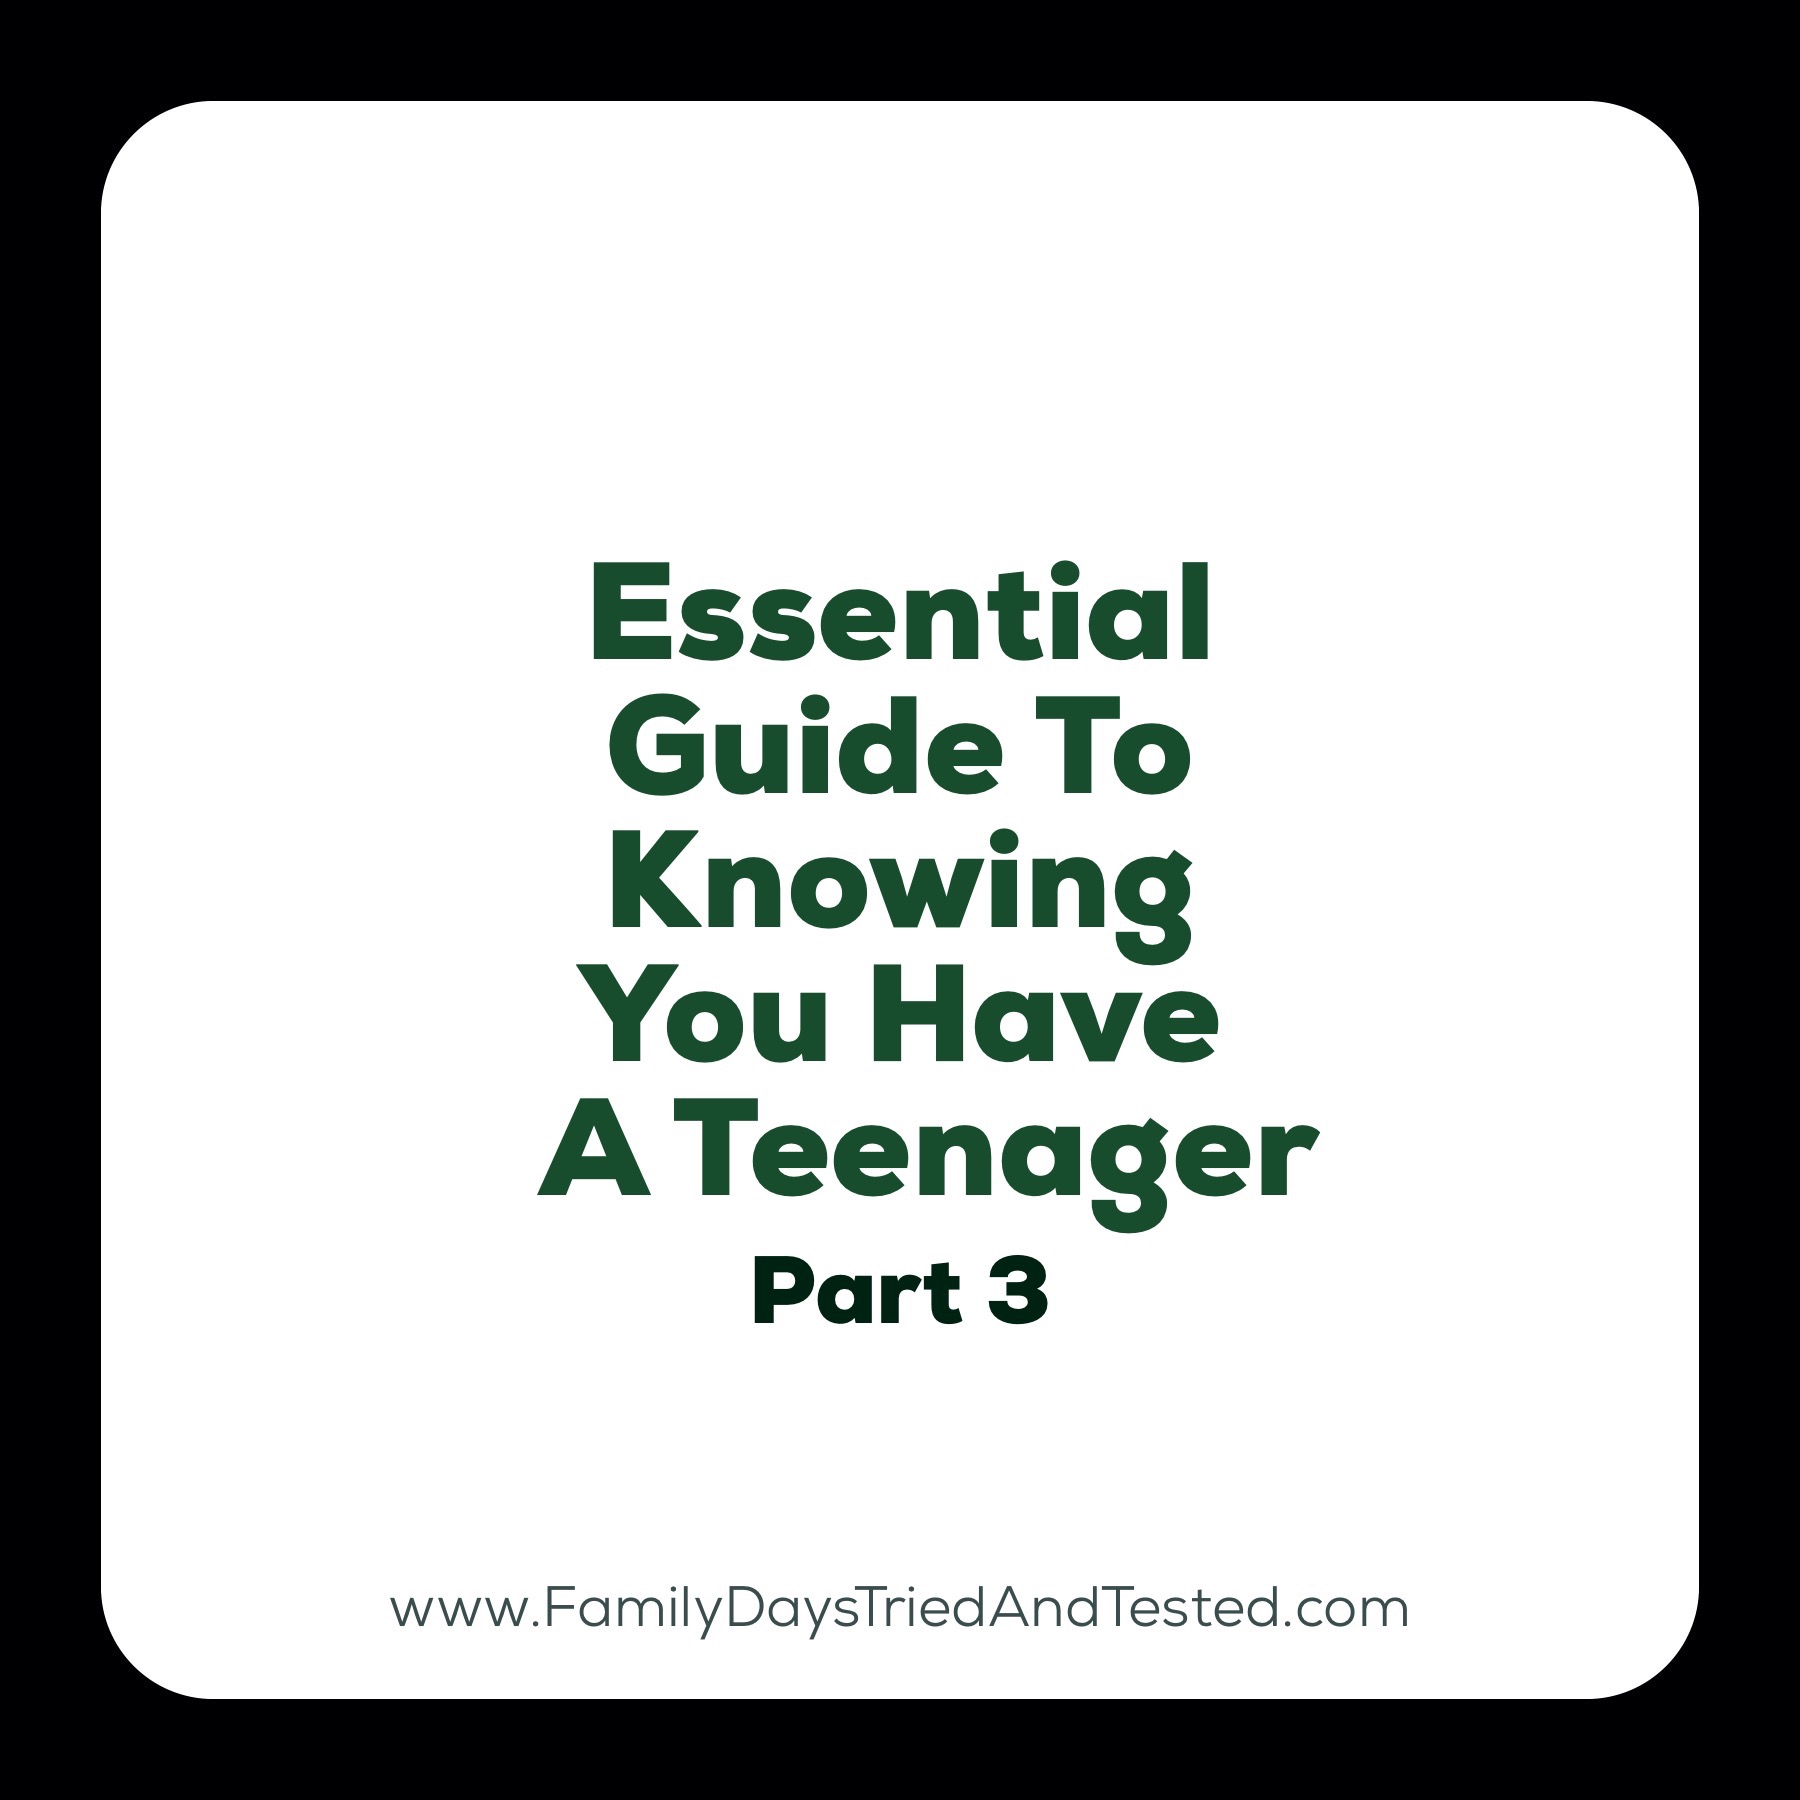 Essential Guide To Knowing You Have A Teenager- Part 3